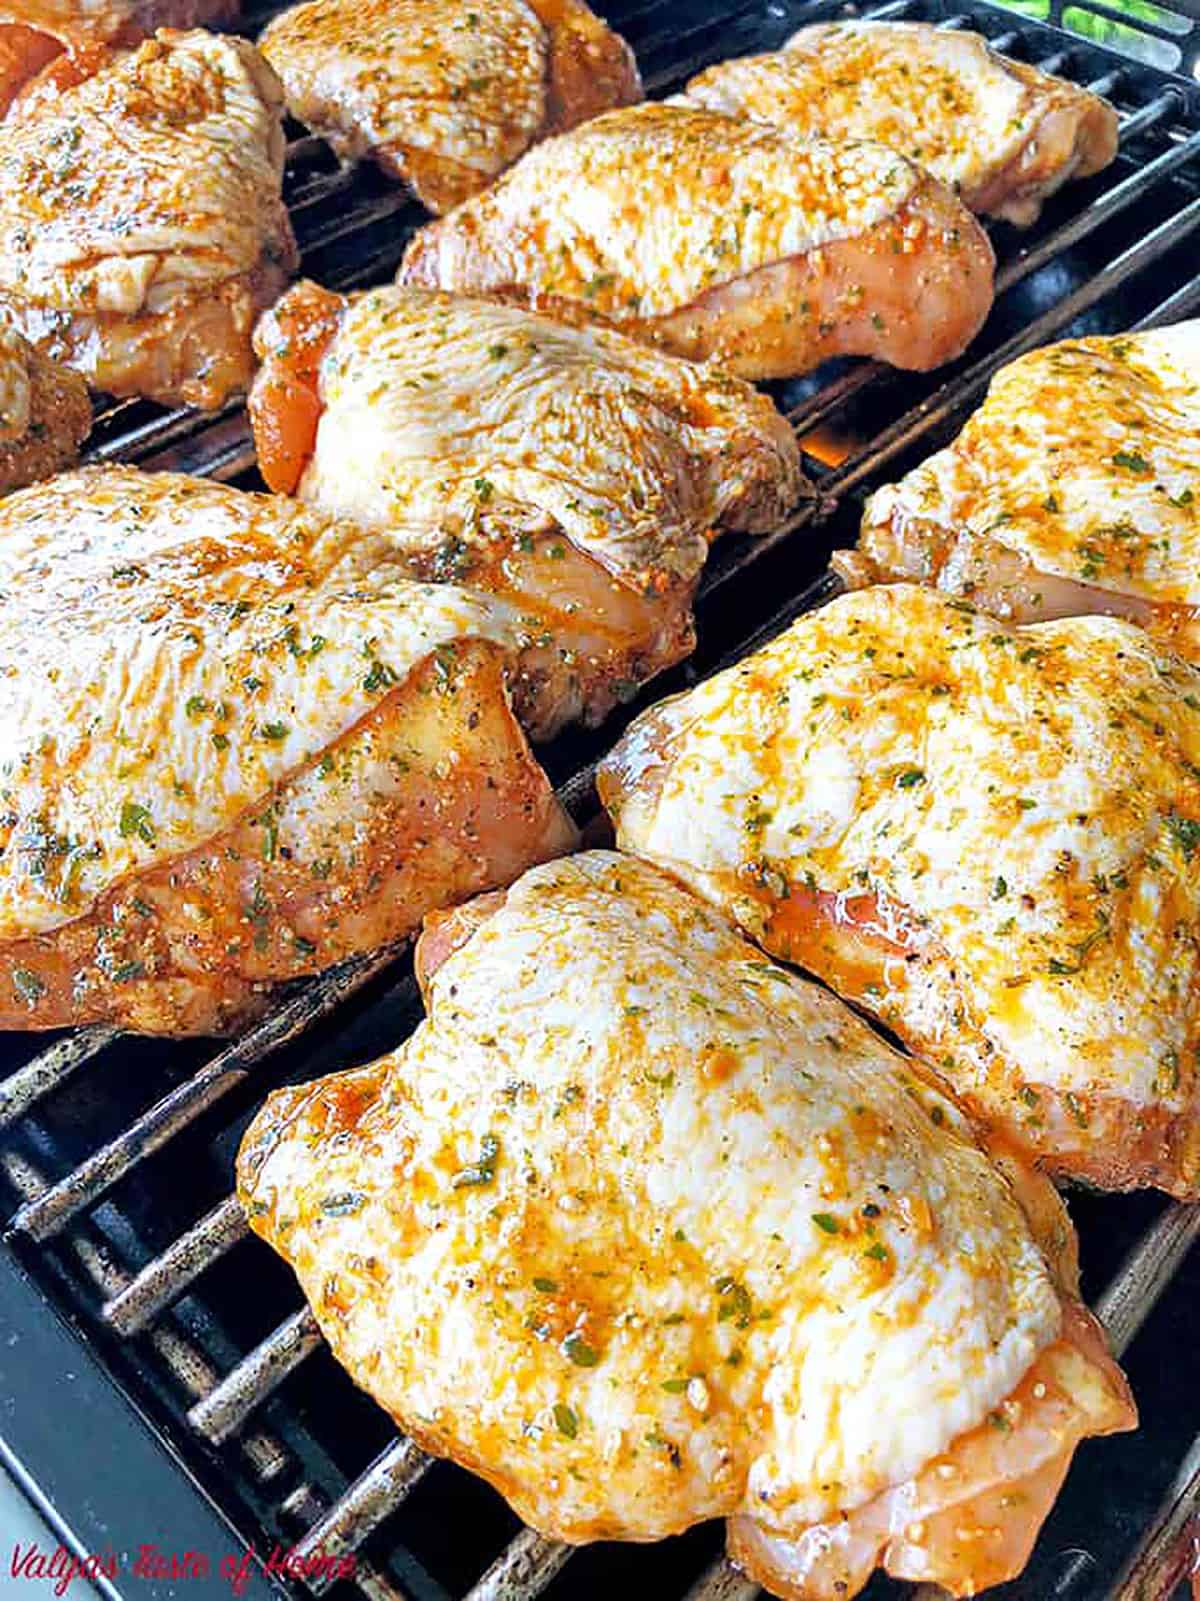 Maintain the temperature on the grill between 320 F – 350 F. Grill the chicken for 15 minutes.